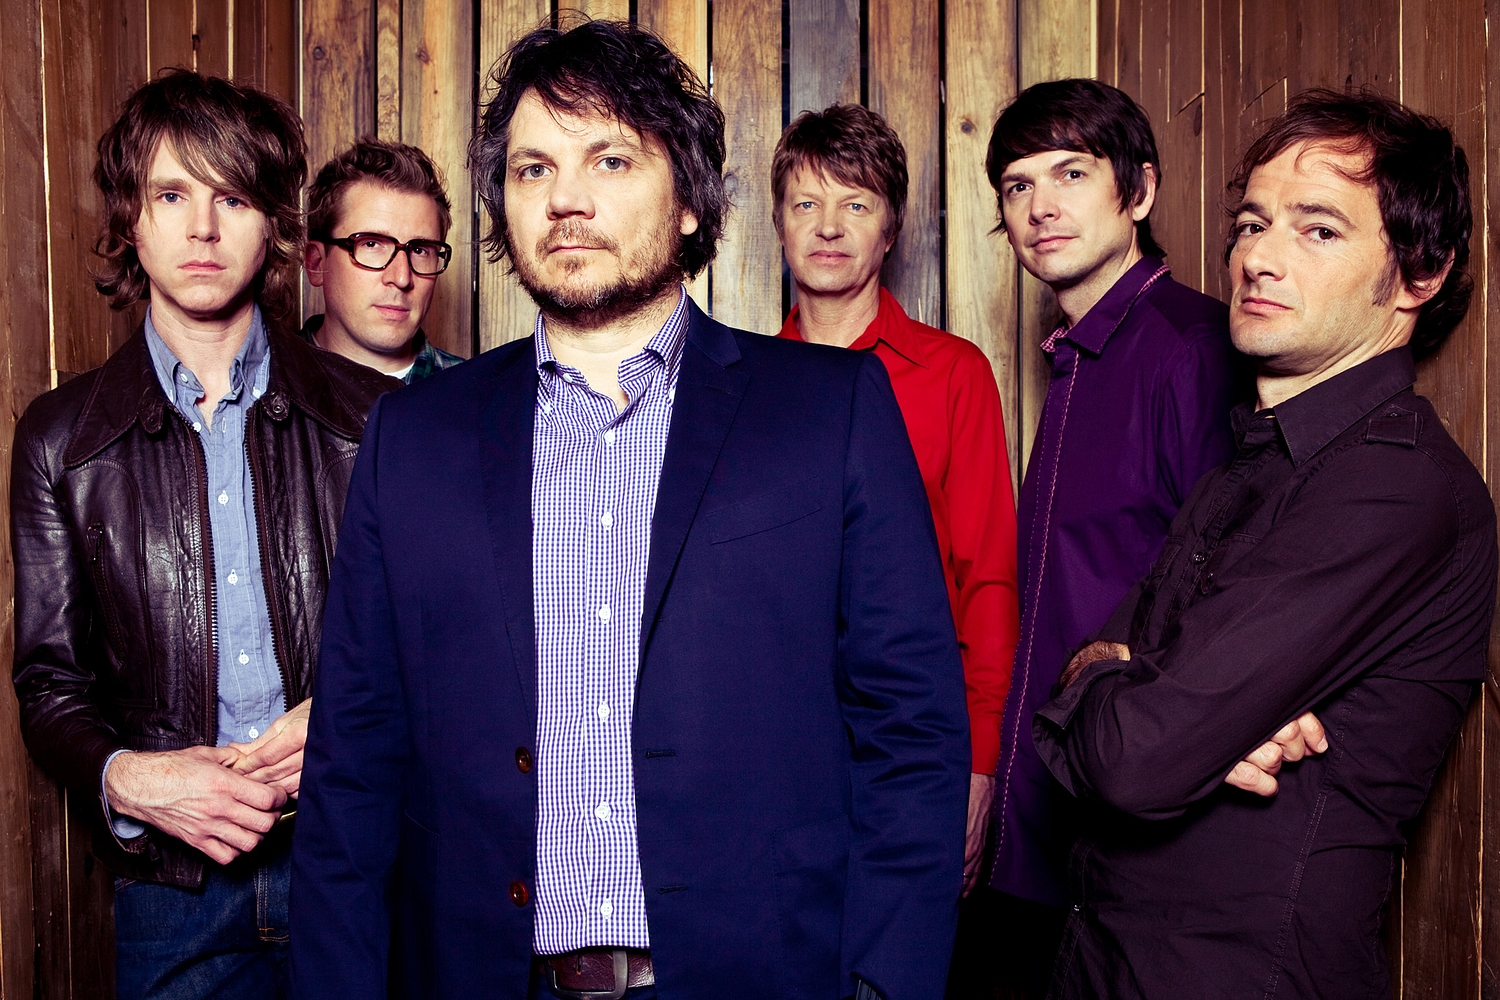 Wilco share new album ‘Star Wars’ as a free surprise release